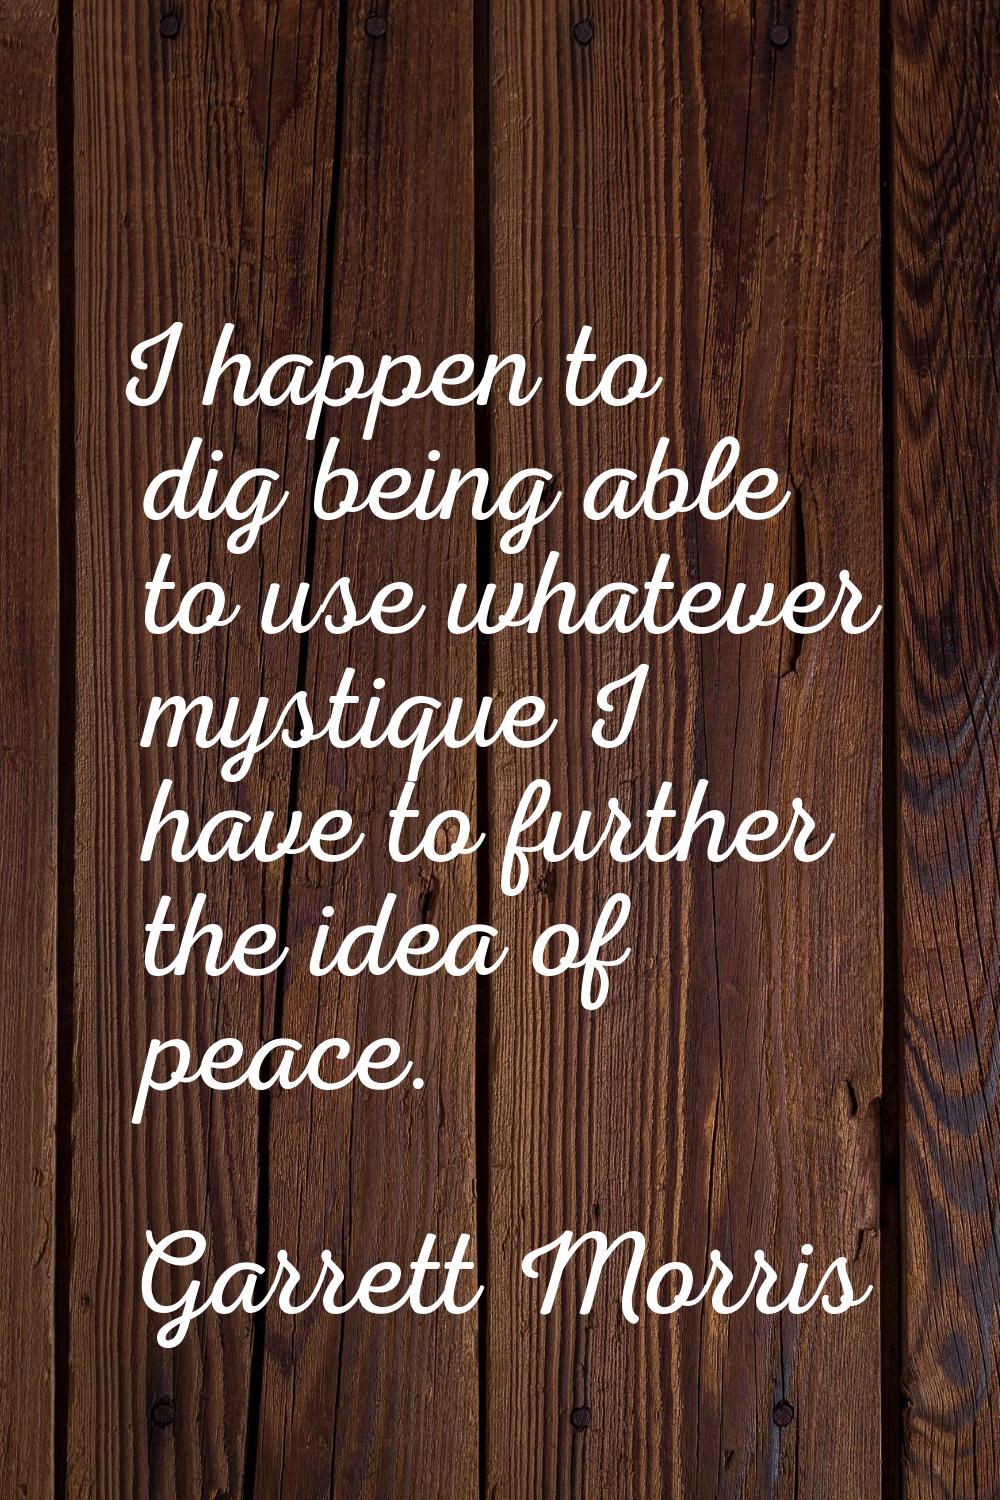 I happen to dig being able to use whatever mystique I have to further the idea of peace.